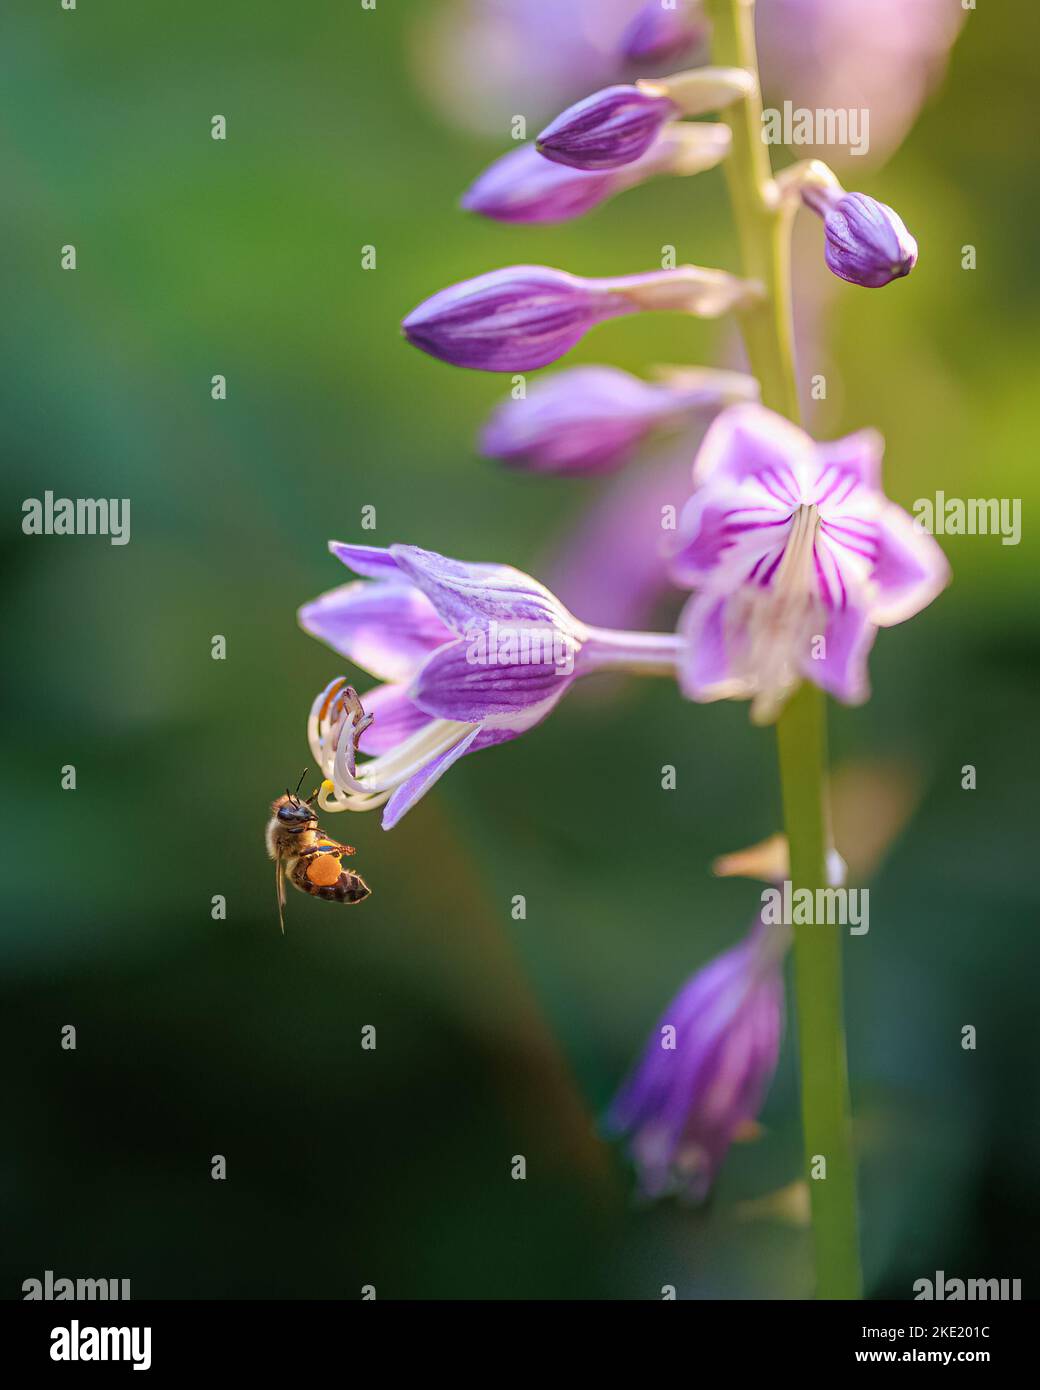 A closeup of honey bee sipping nectar from purple flower Stock Photo